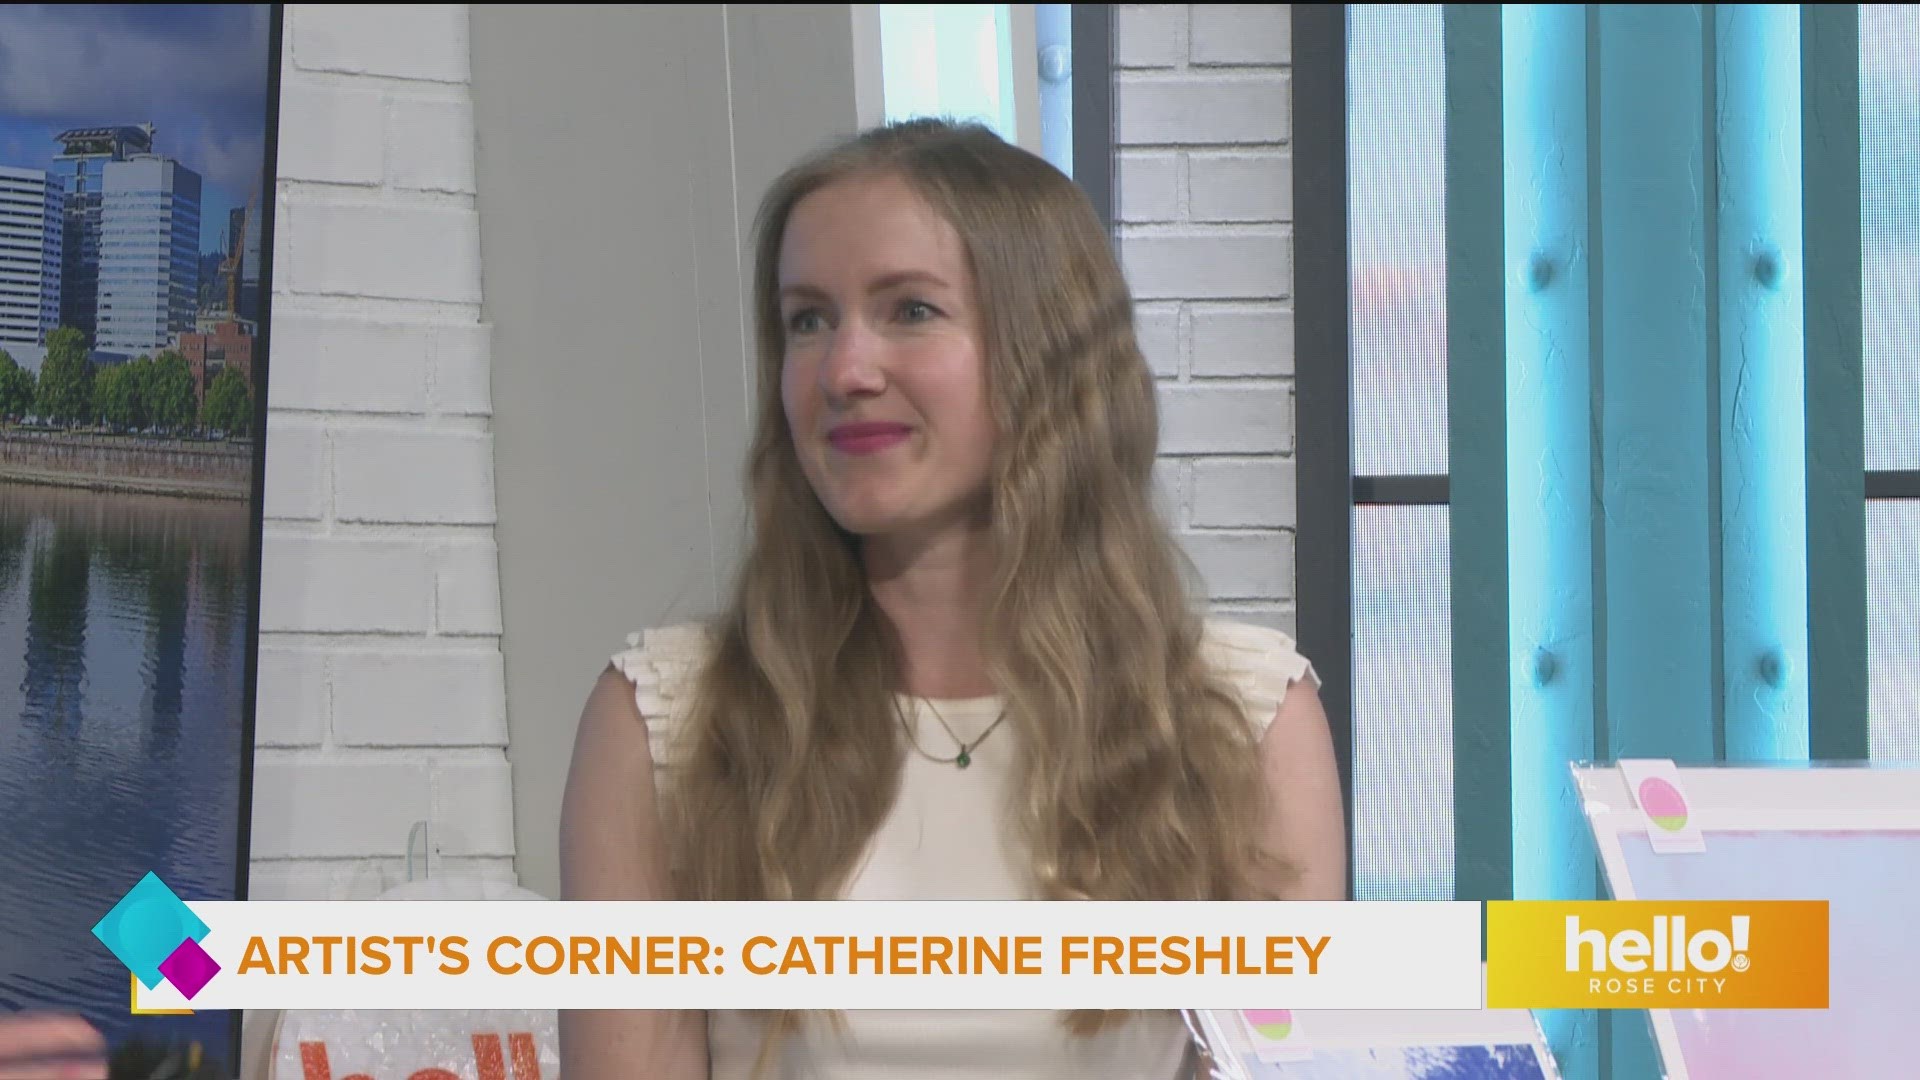 Catherine is an artist and the owner of Catherine Freshley Fine Art